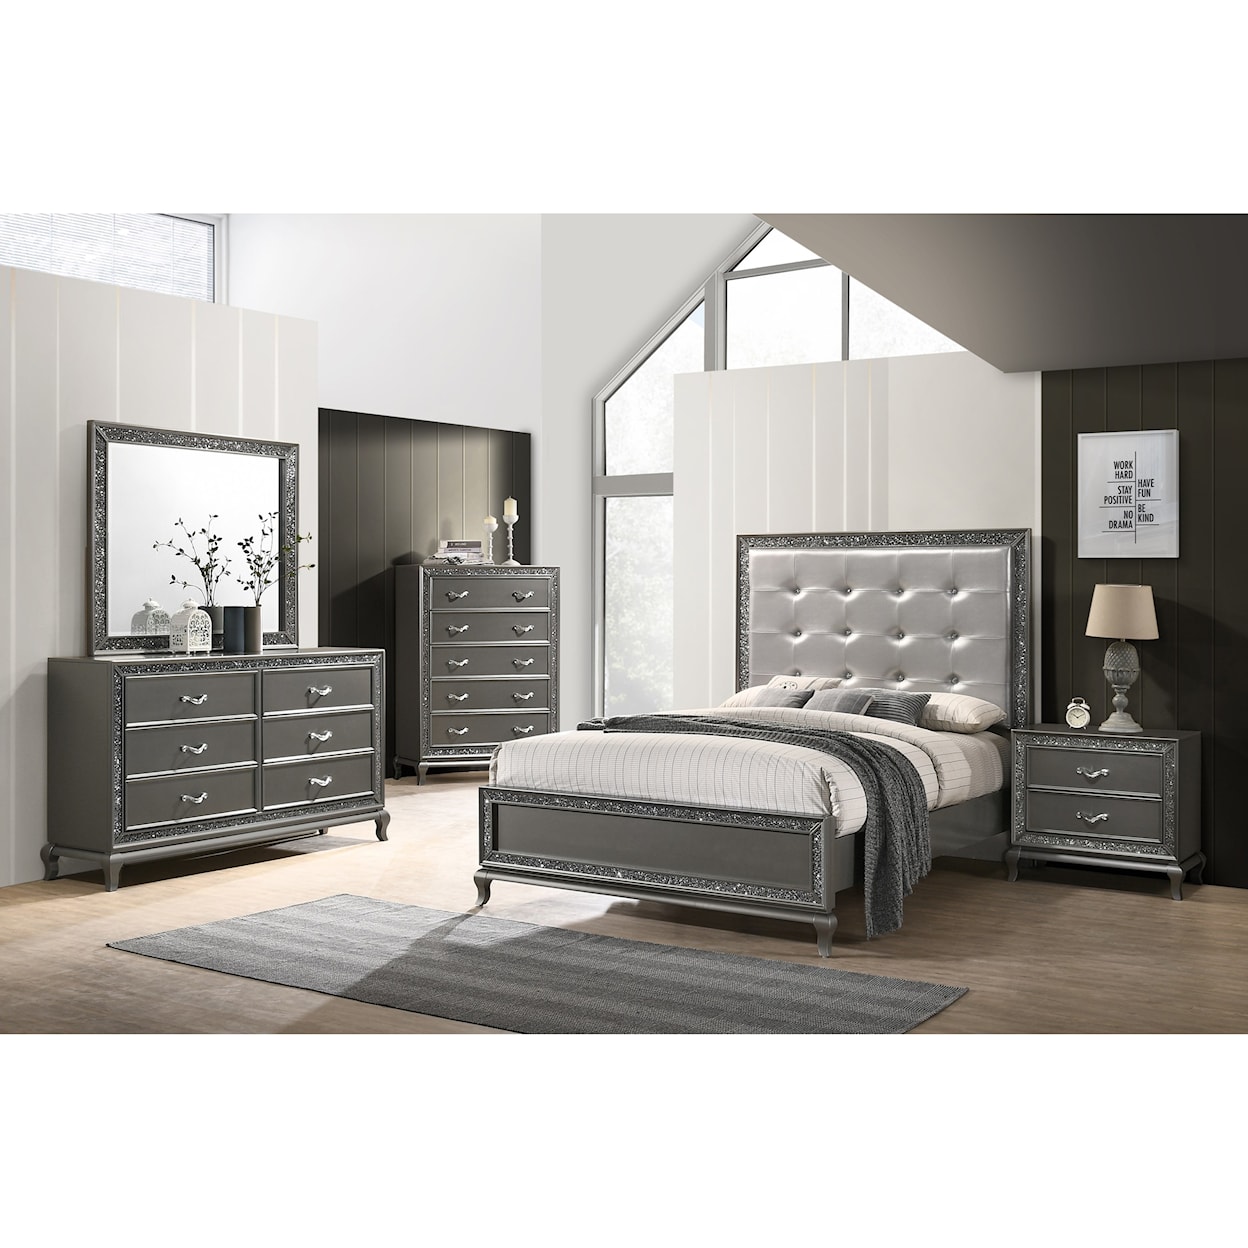 New Classic Furniture Park Imperial Full Bedroom Group